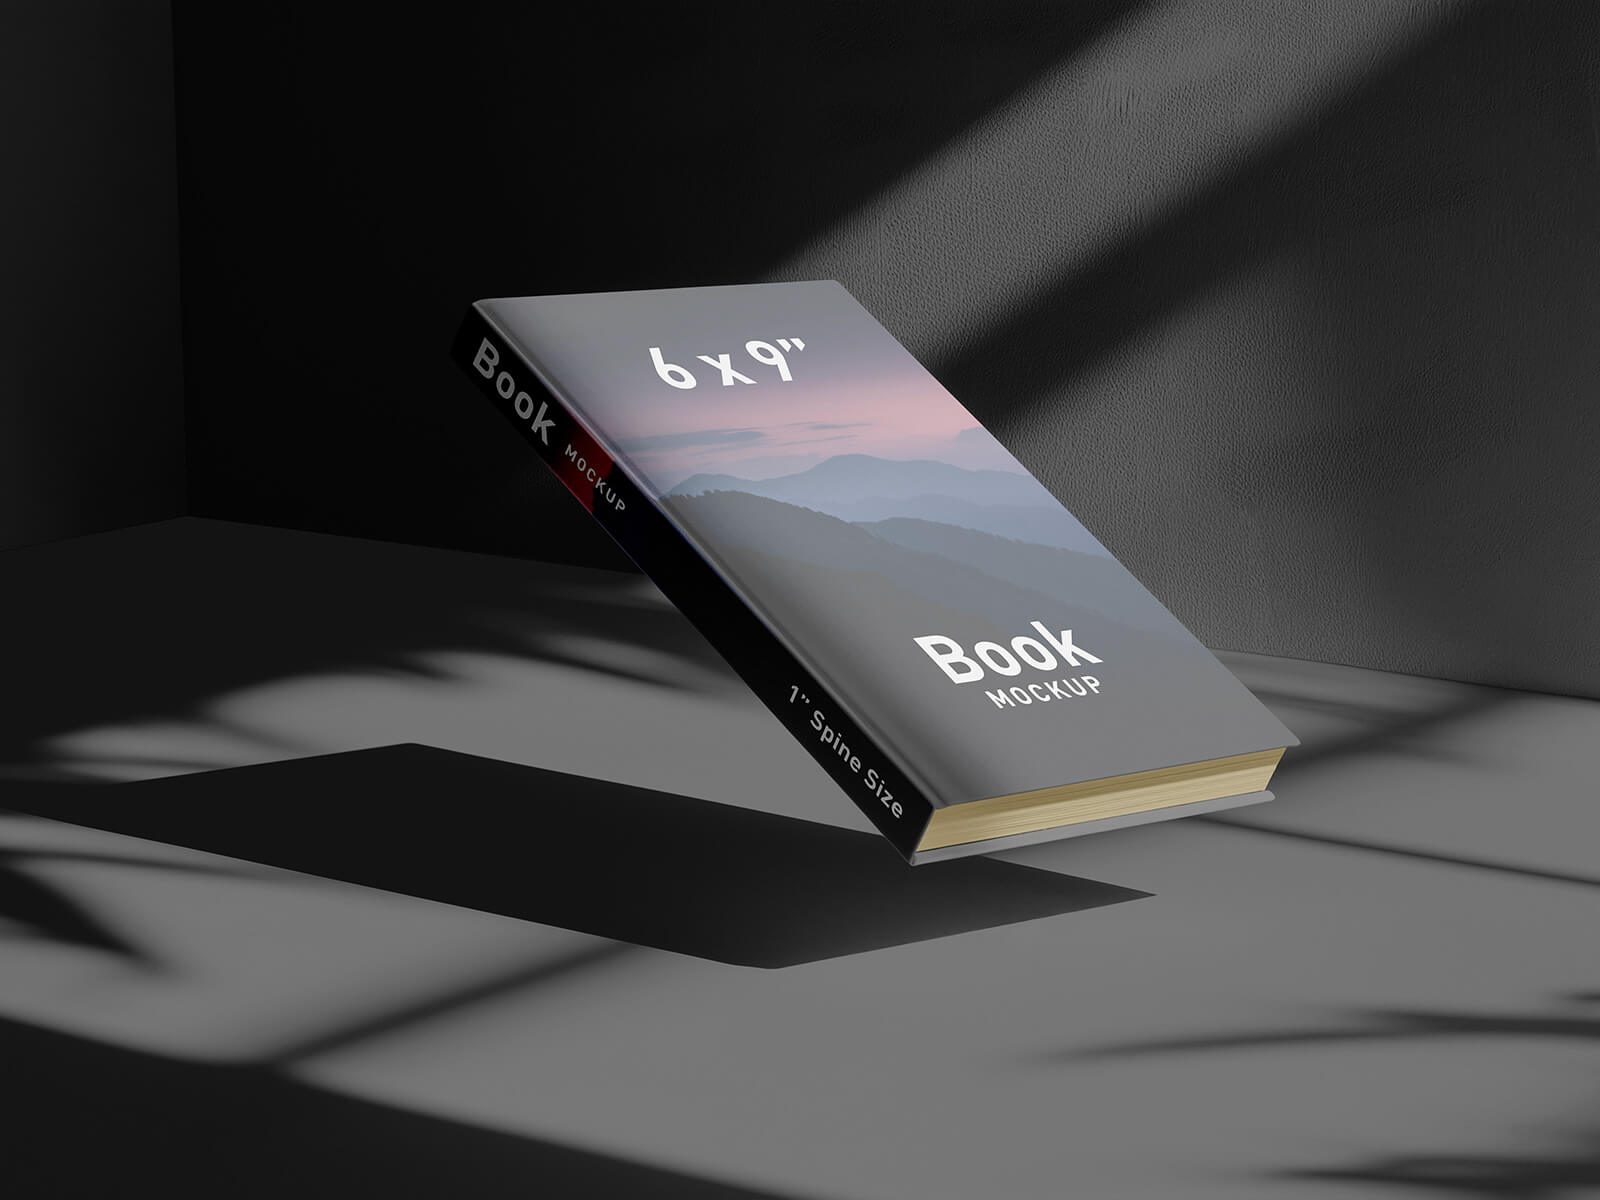 Free Shadow 6 x 9 Inches Hardcover Book Title Mockup PSD